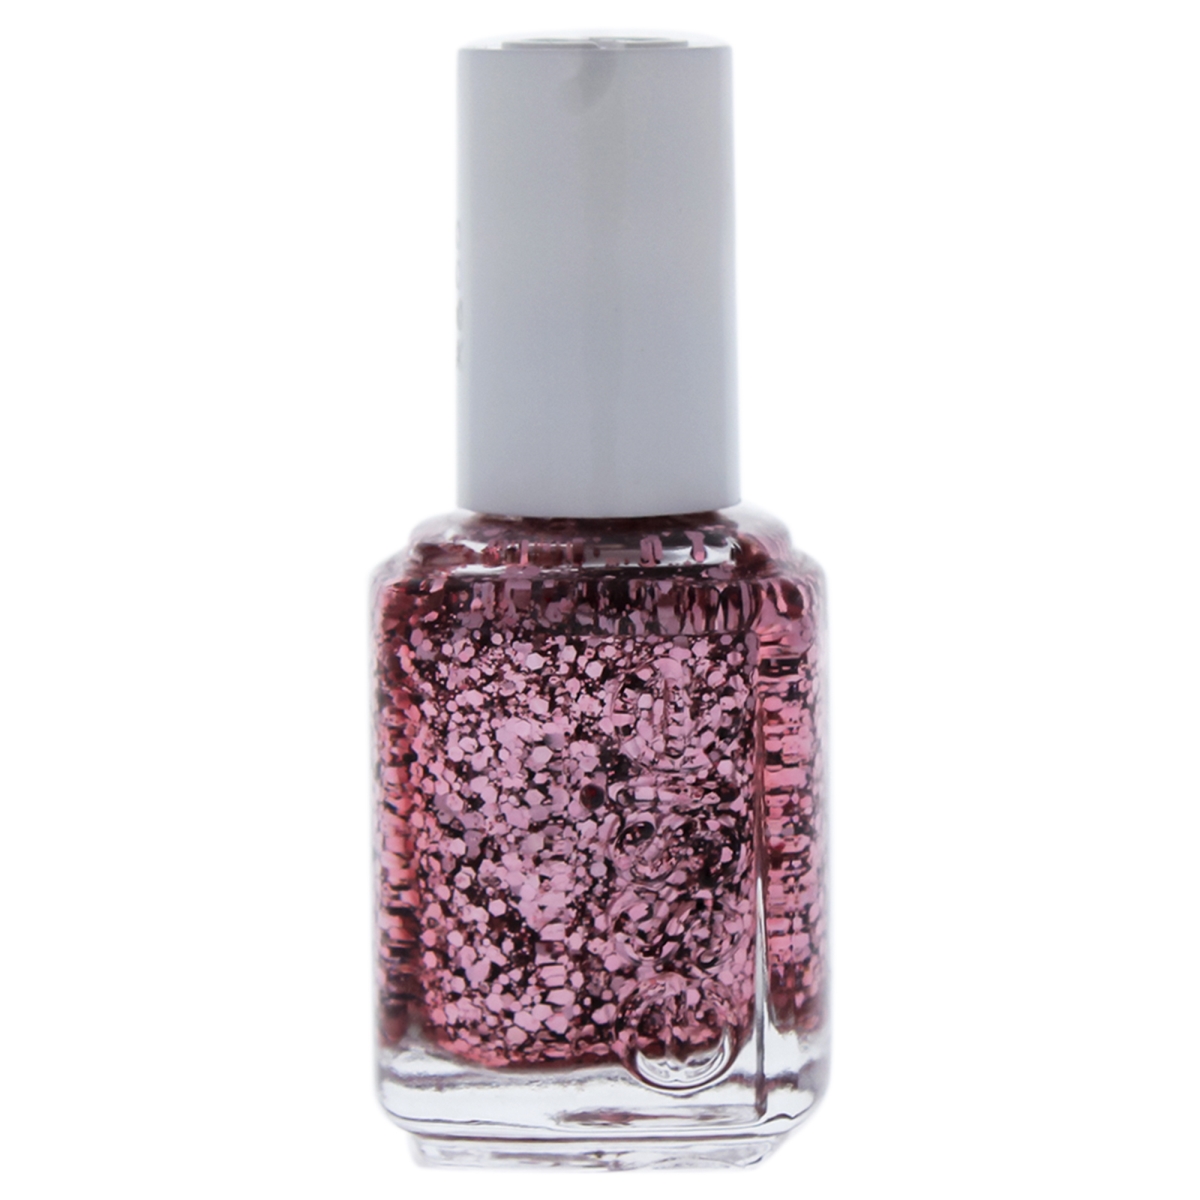 Picture of Essie I0087833 0.46 oz Nail Polish for Womens - 3002 A Cut Above